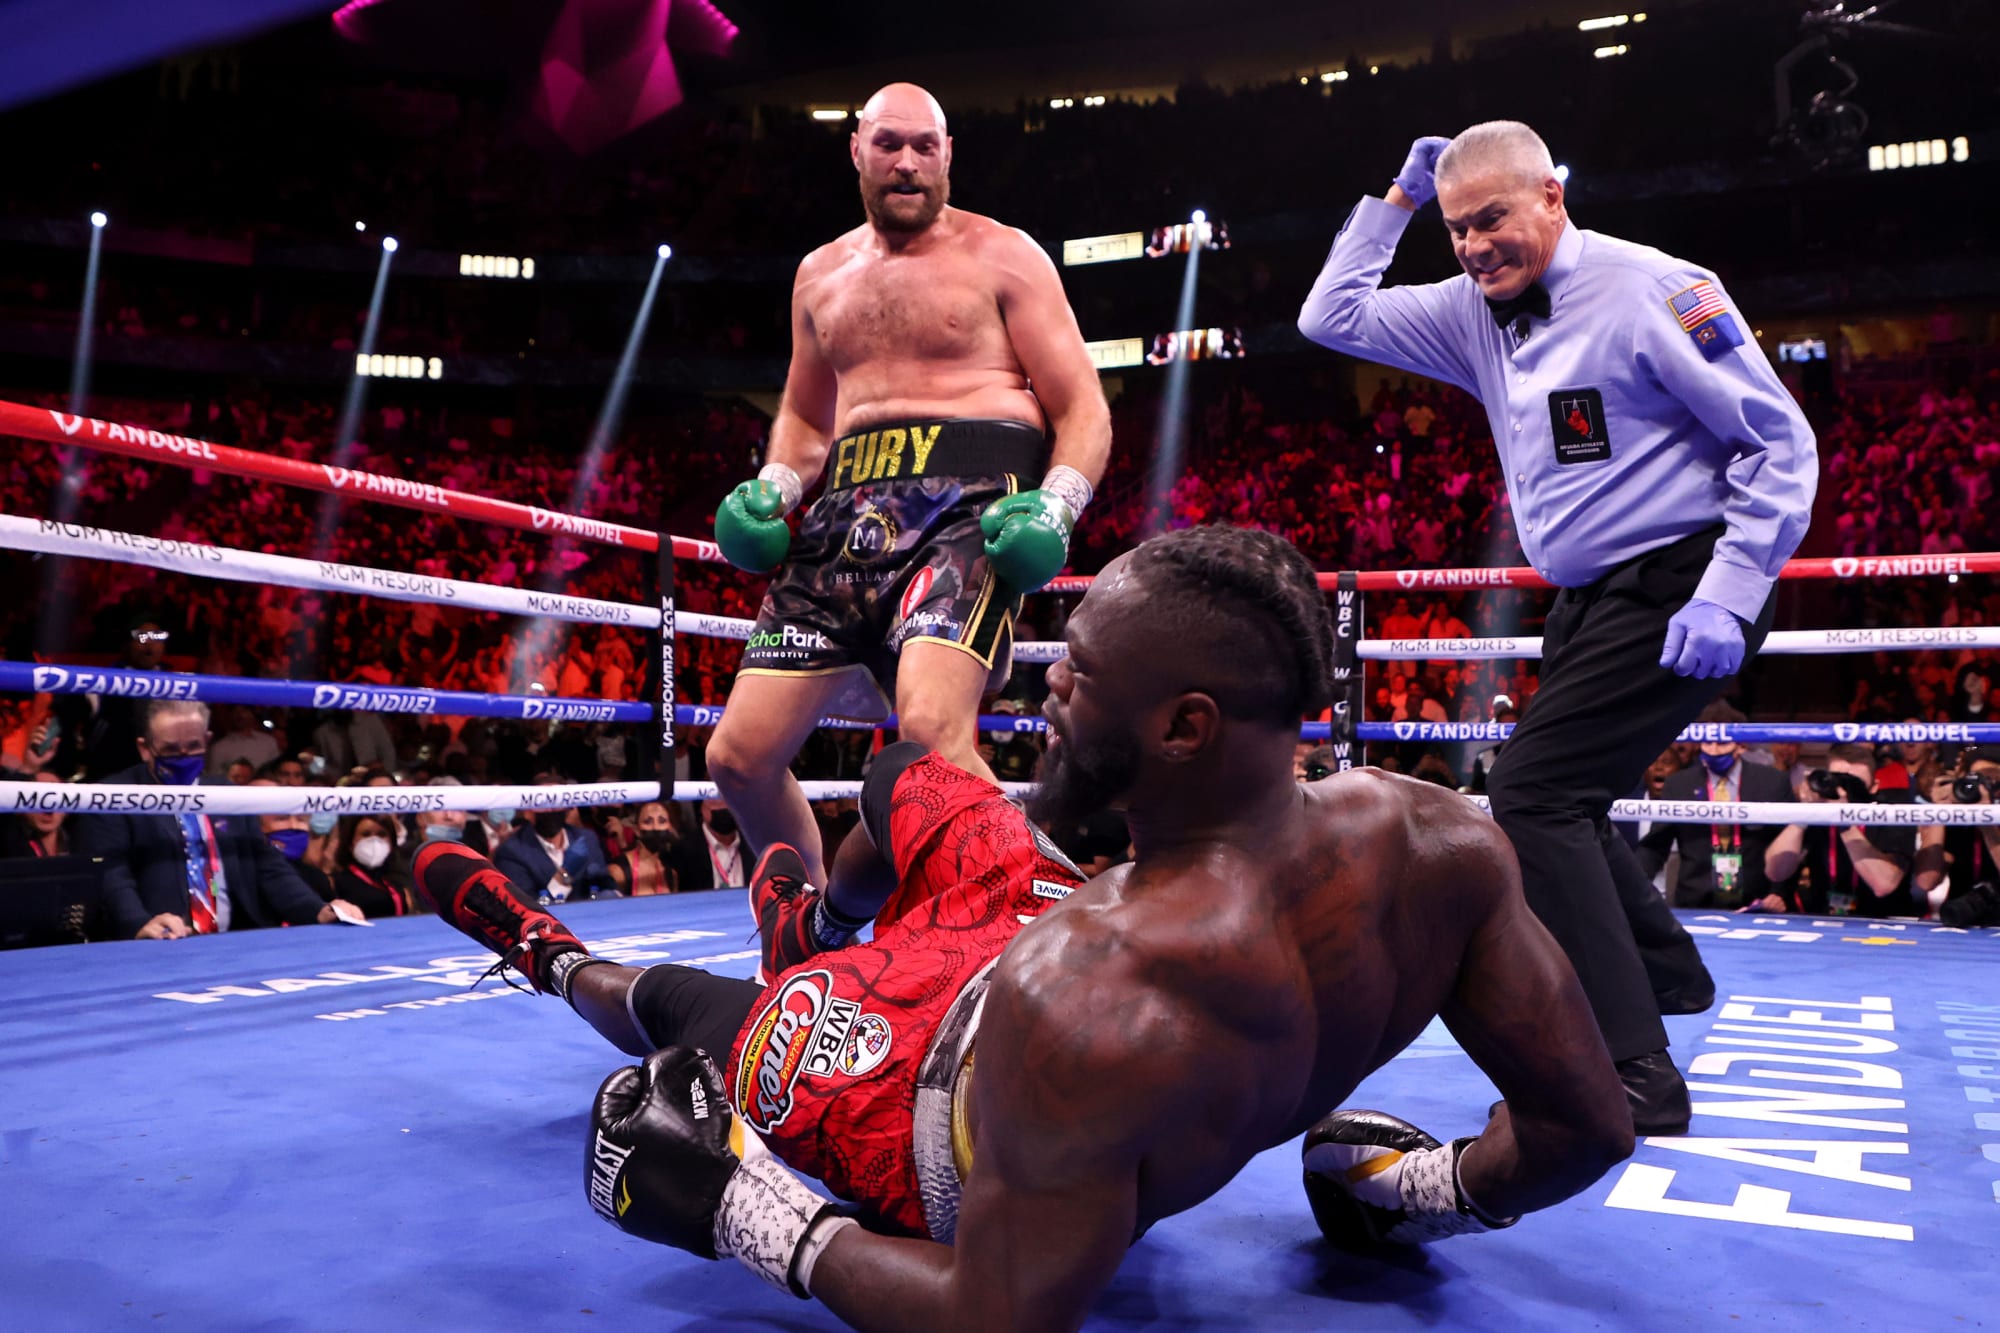 Fury vs Wilder 3 highlights: 3 of the best moments from